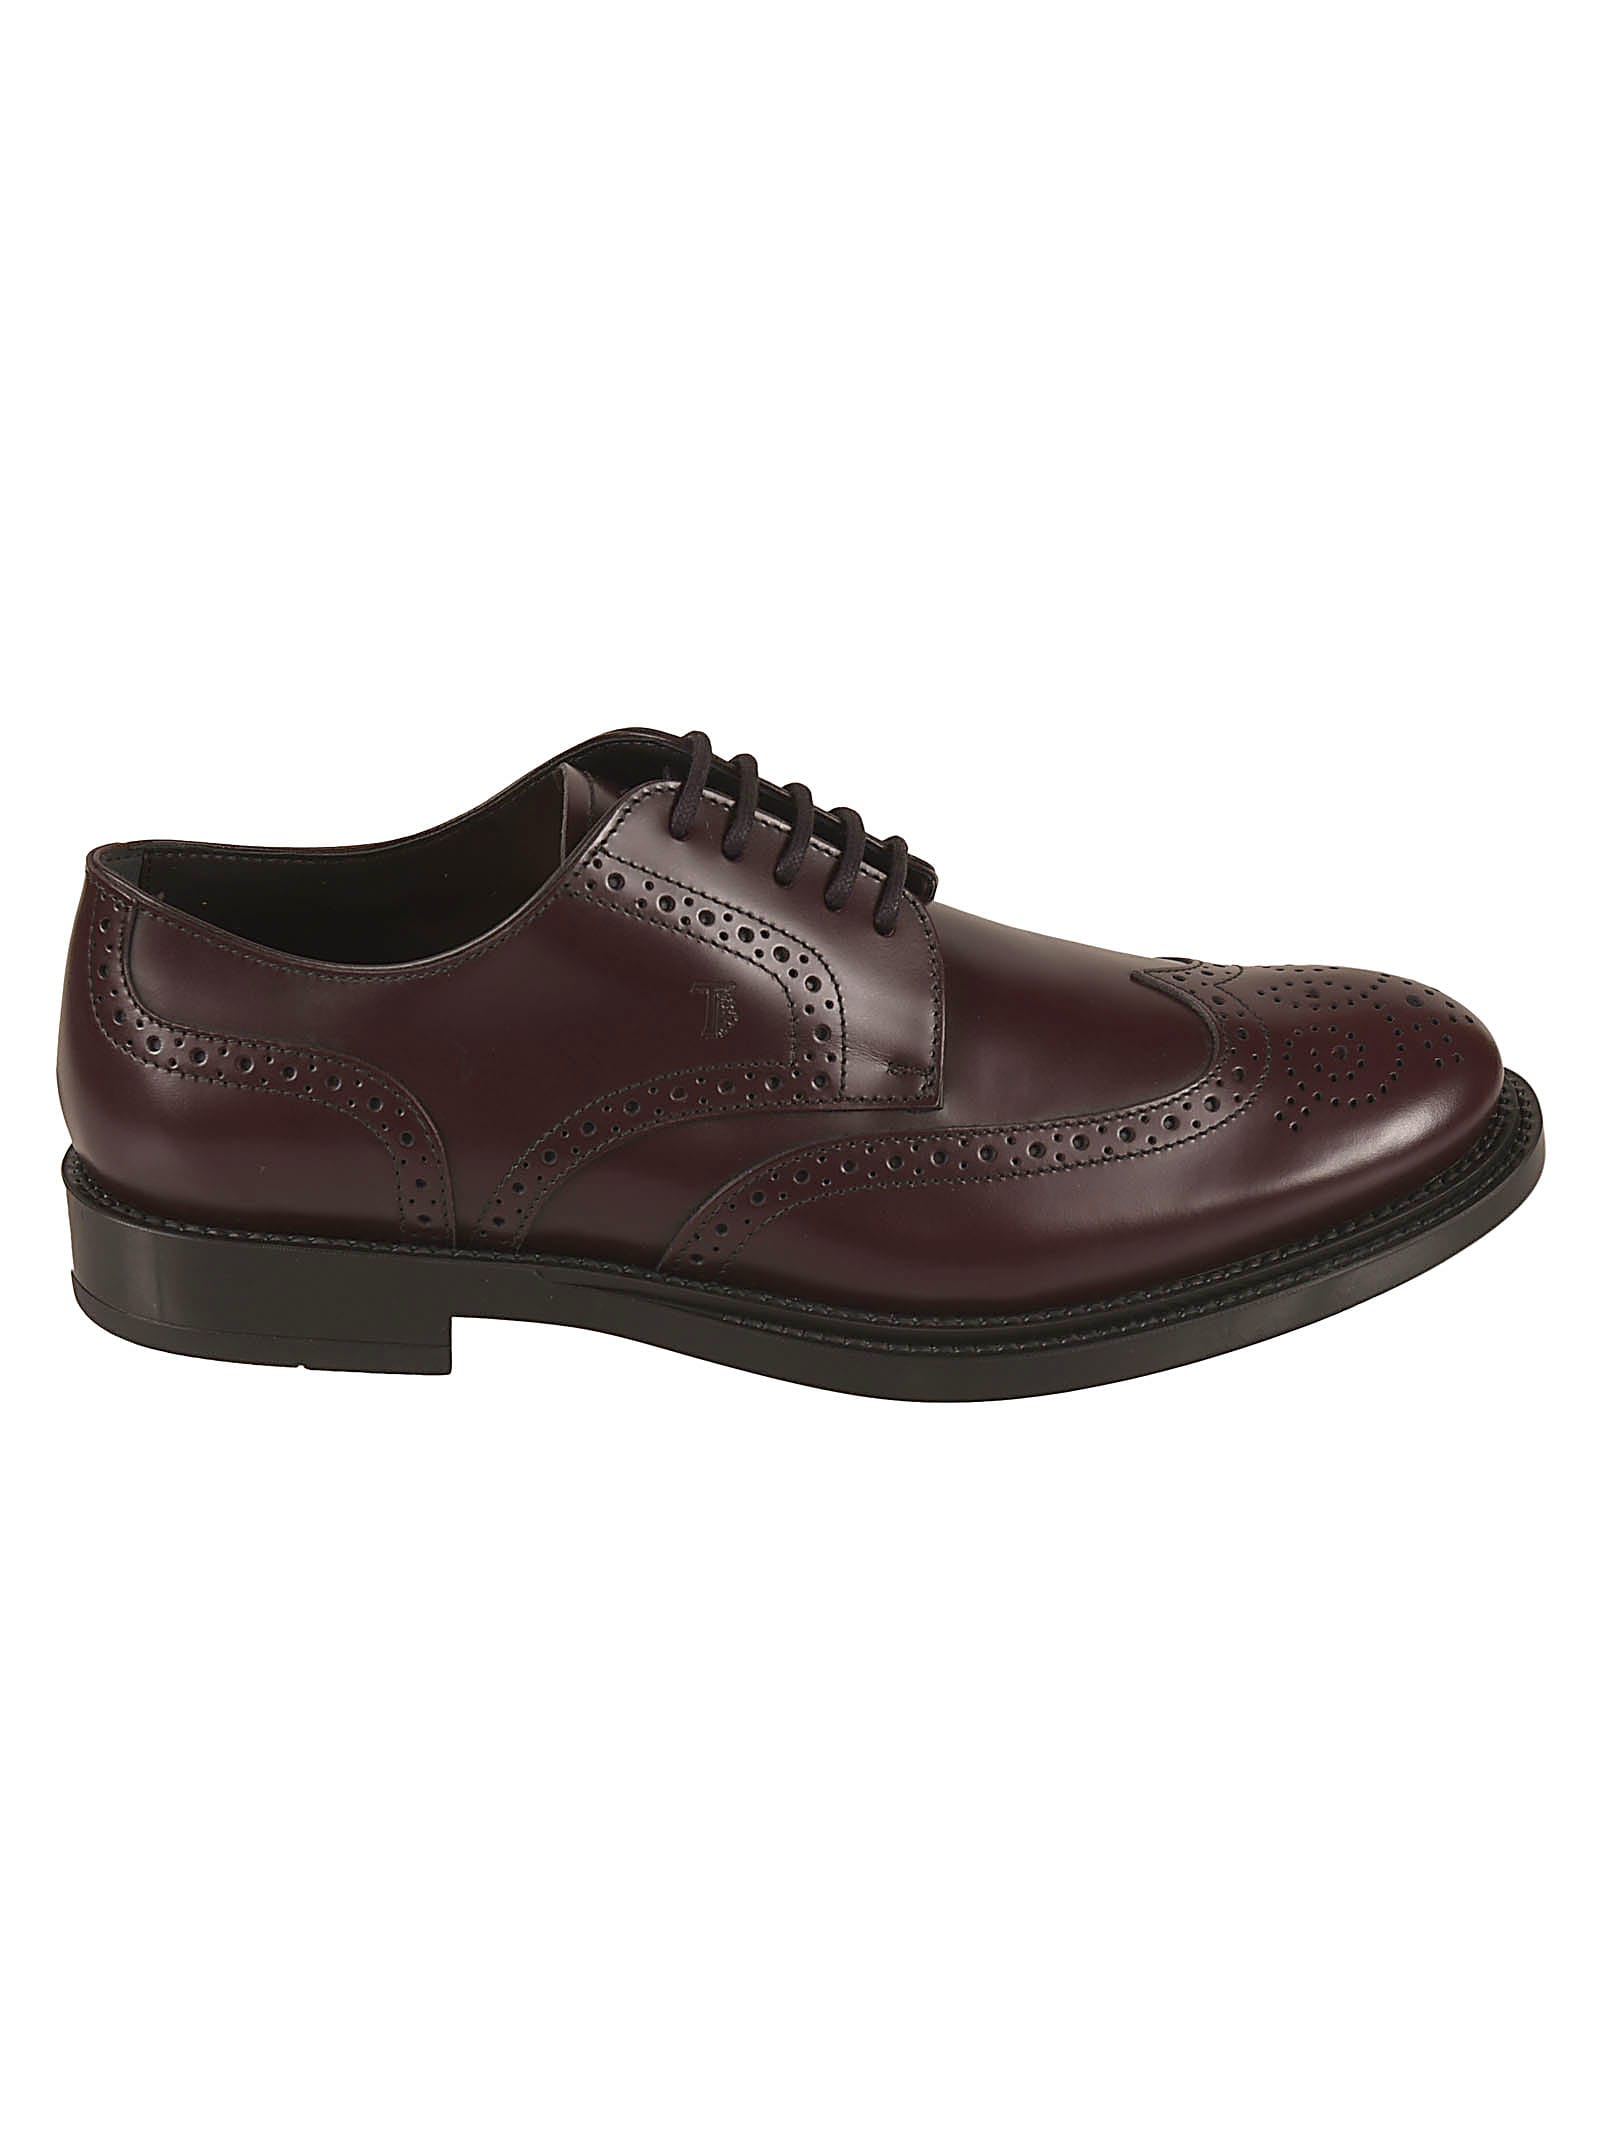 Tods Embossed Oxford Shoes